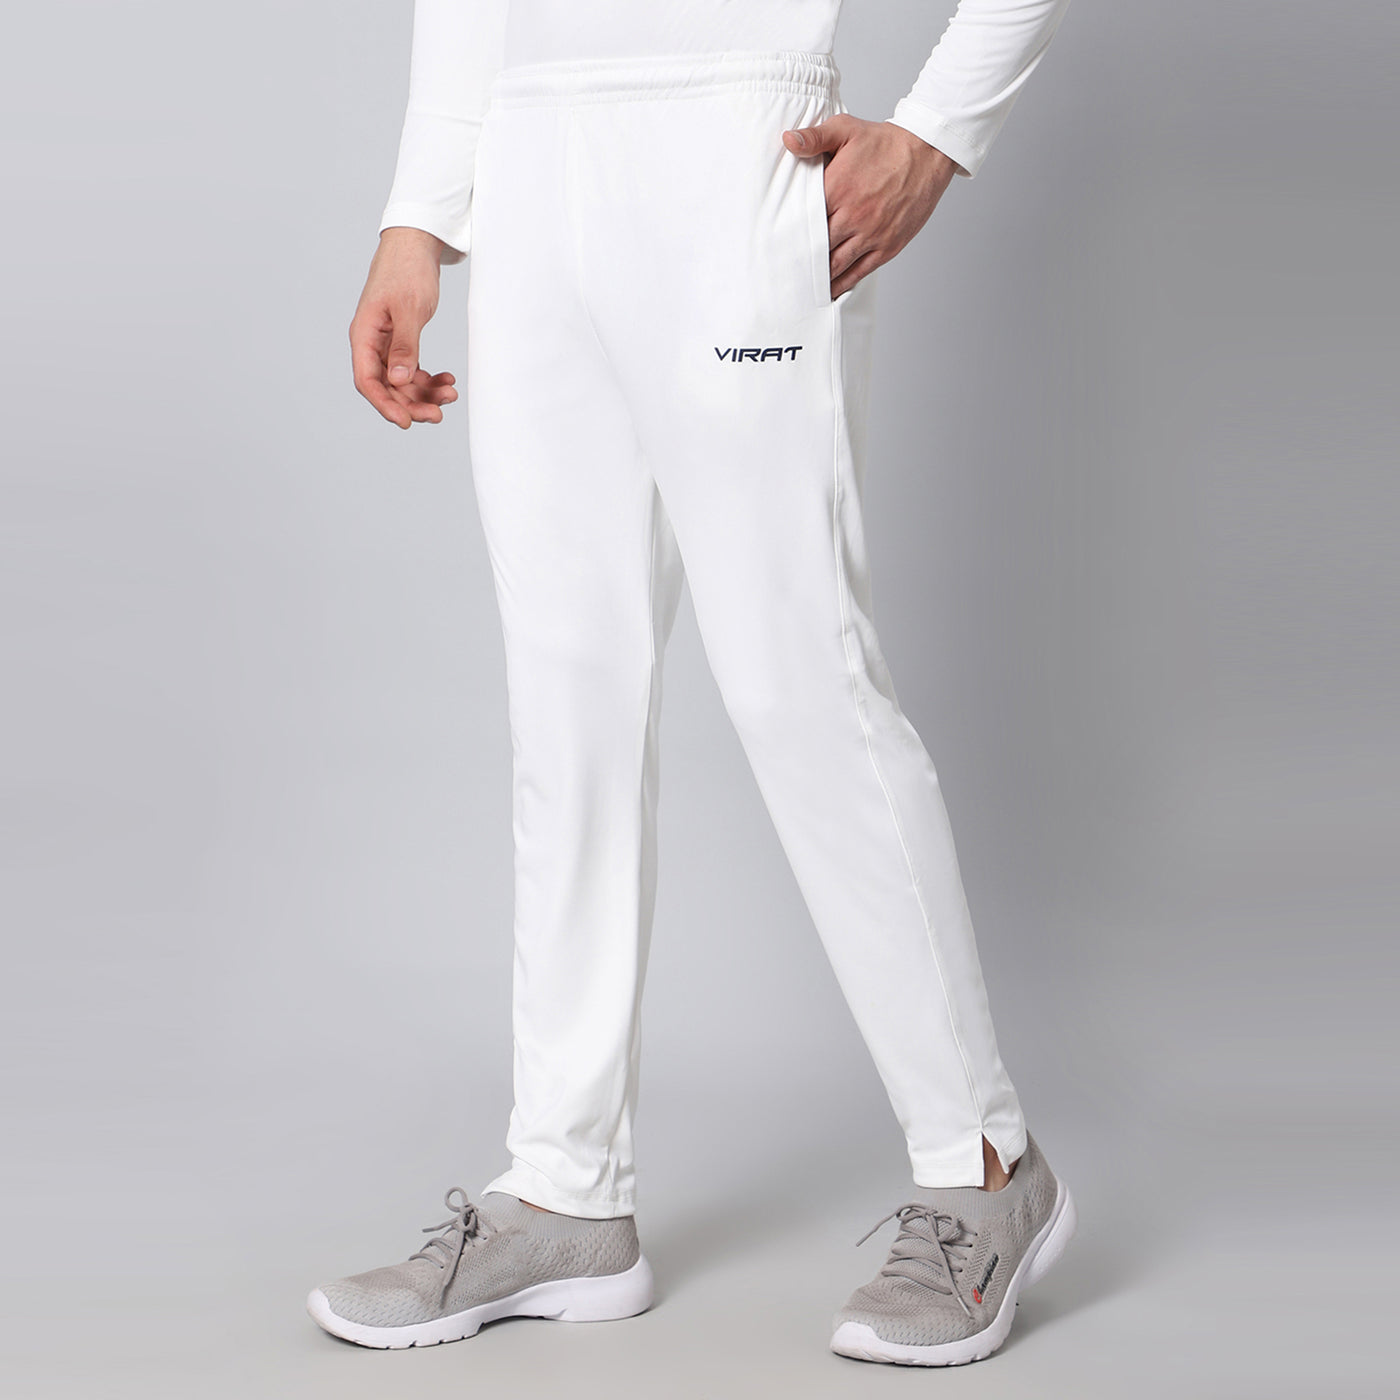 ROYALEWAY Lower Track Pant White RWM5001, Age: Young at Rs 699/piece in Wai